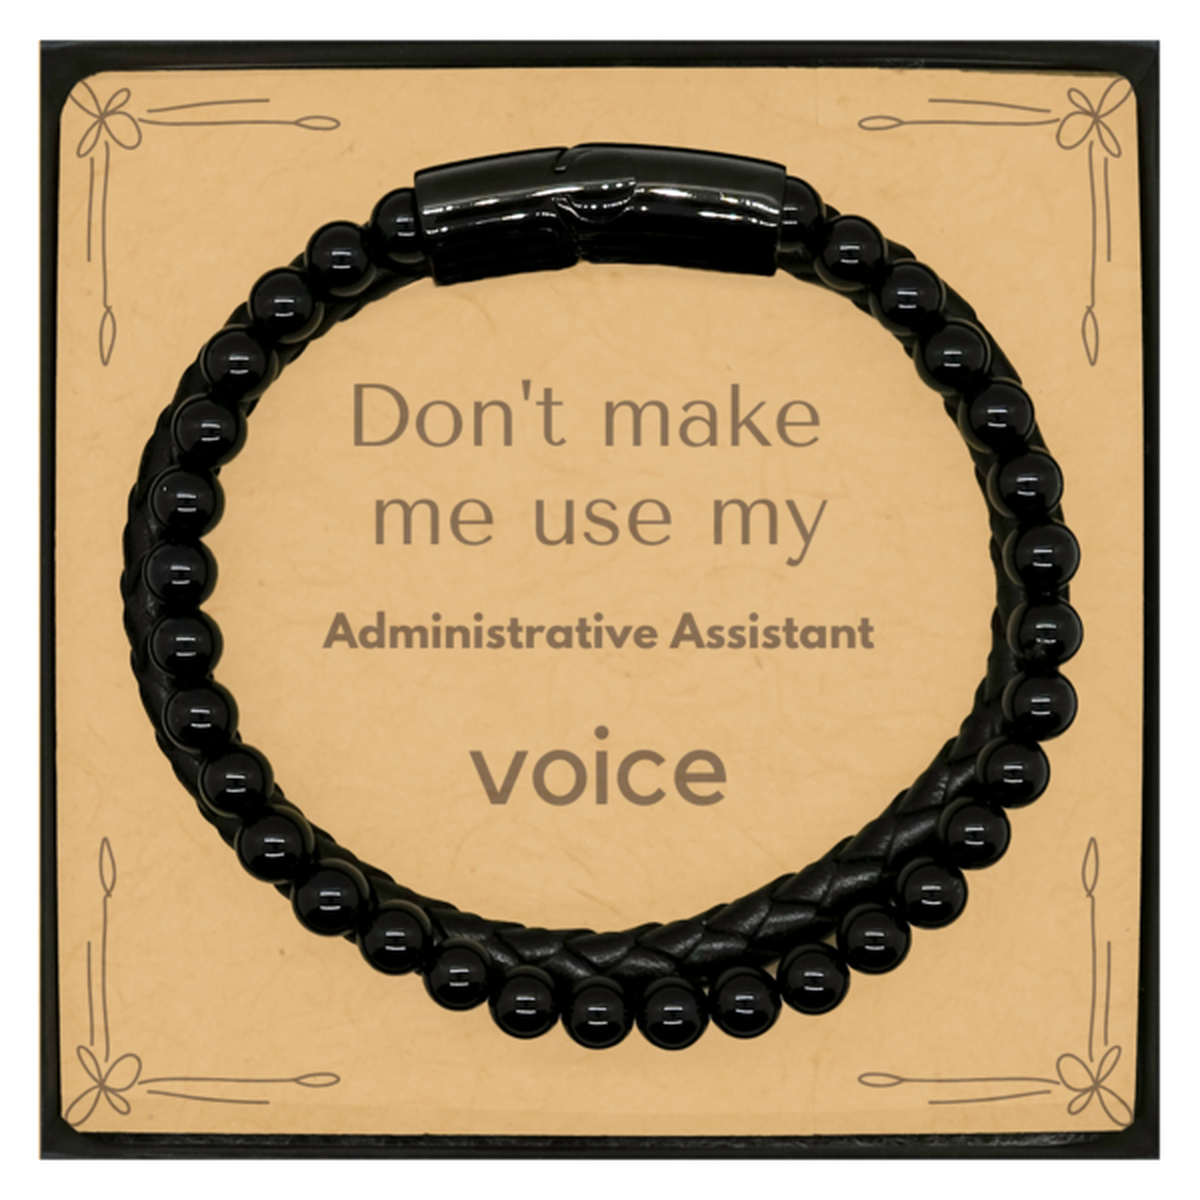 Don't make me use my Administrative Assistant voice, Sarcasm Administrative Assistant Card Gifts, Christmas Administrative Assistant Stone Leather Bracelets Birthday Unique Gifts For Administrative Assistant Coworkers, Men, Women, Colleague, Friends